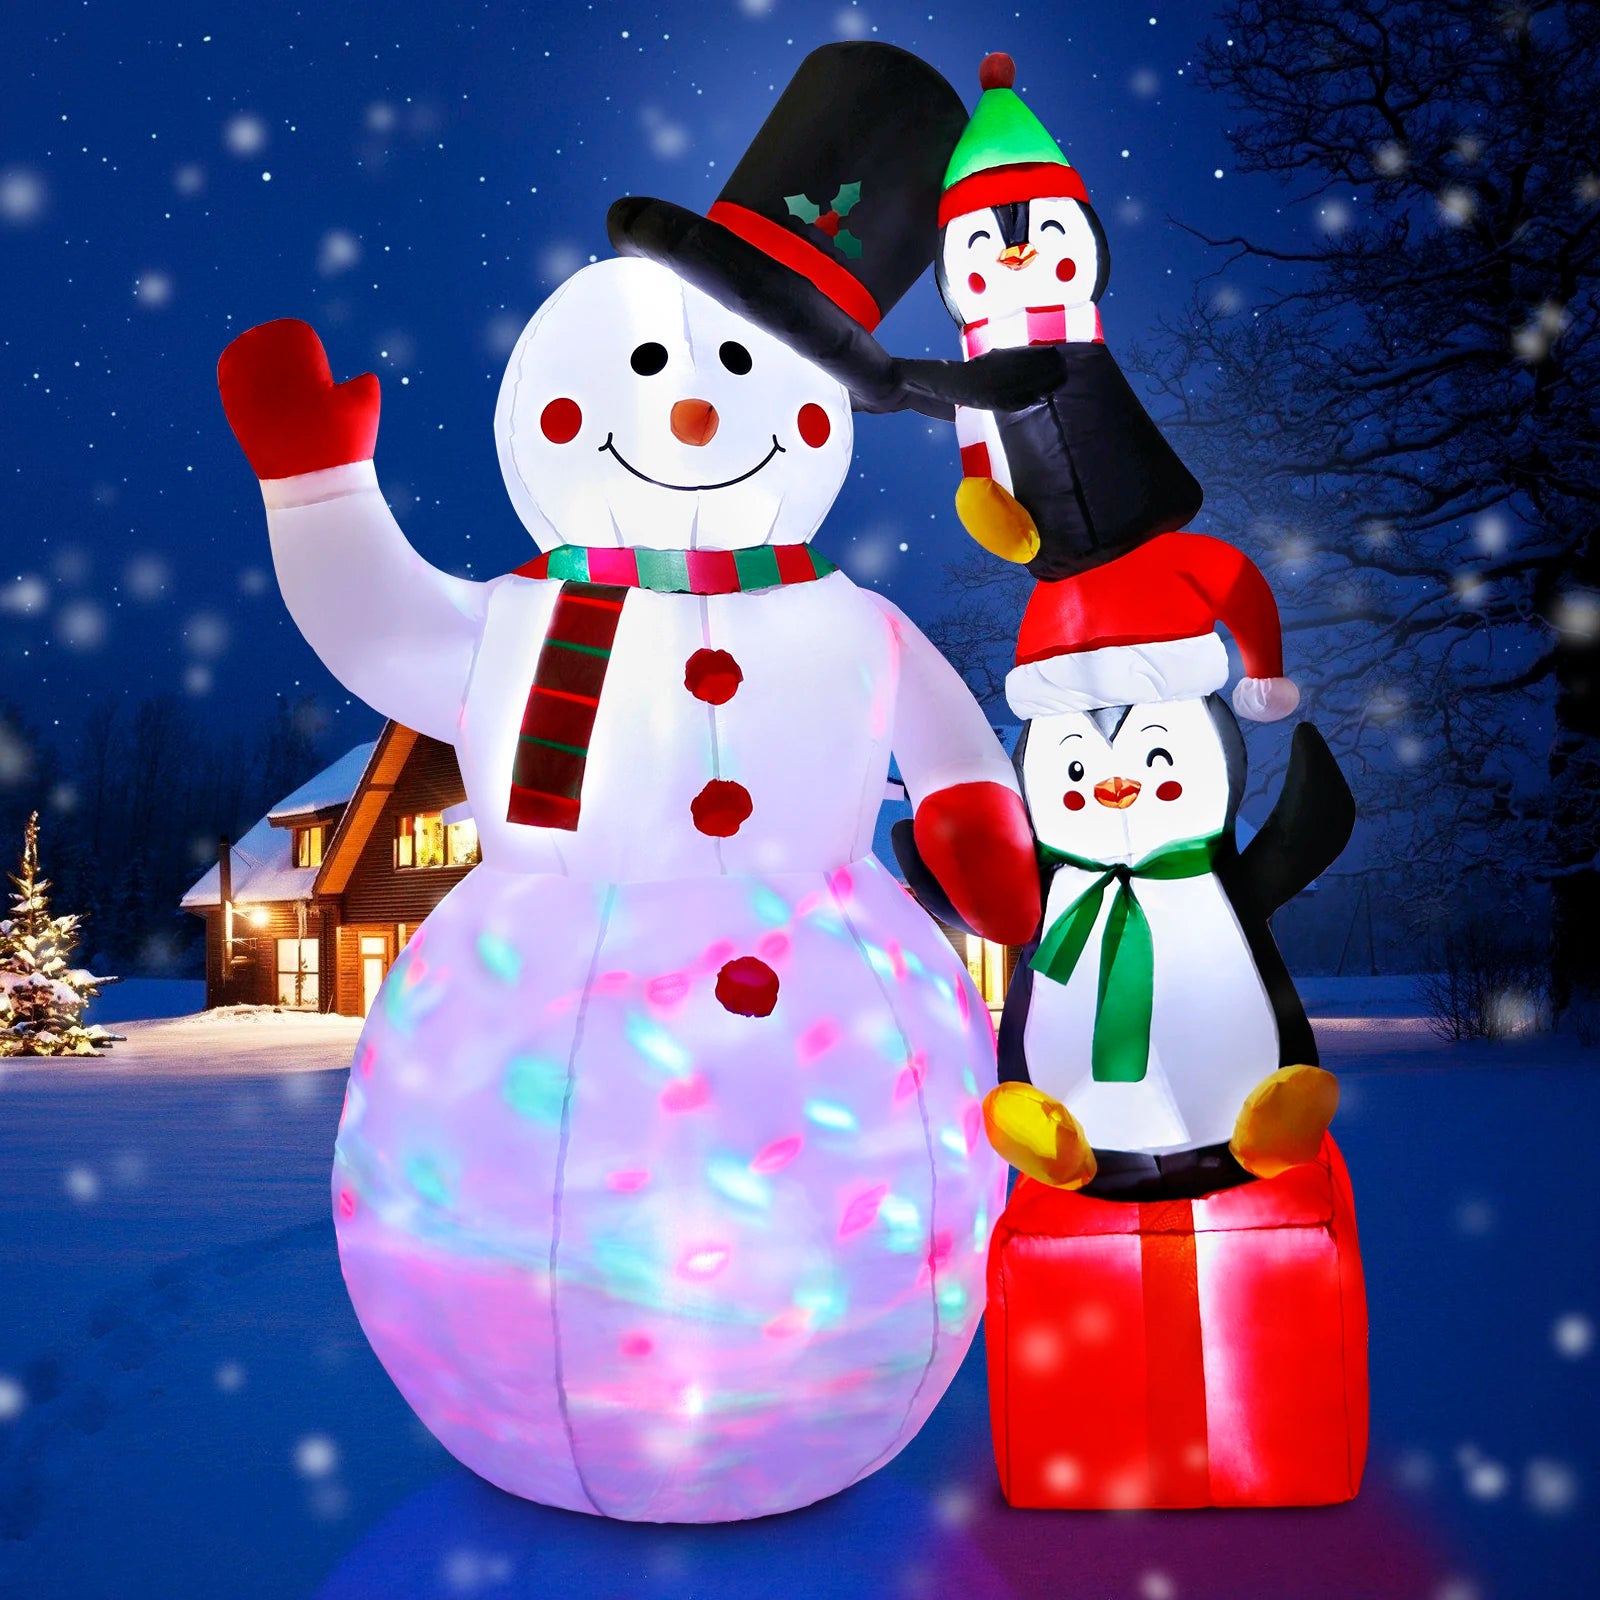 6ft Charming Inflatable Snowman Penguins for Christmas - Festive Yard Decor with Colorful Rotating LED Lights - Outdoor Holiday Display ShopOnlyDeal